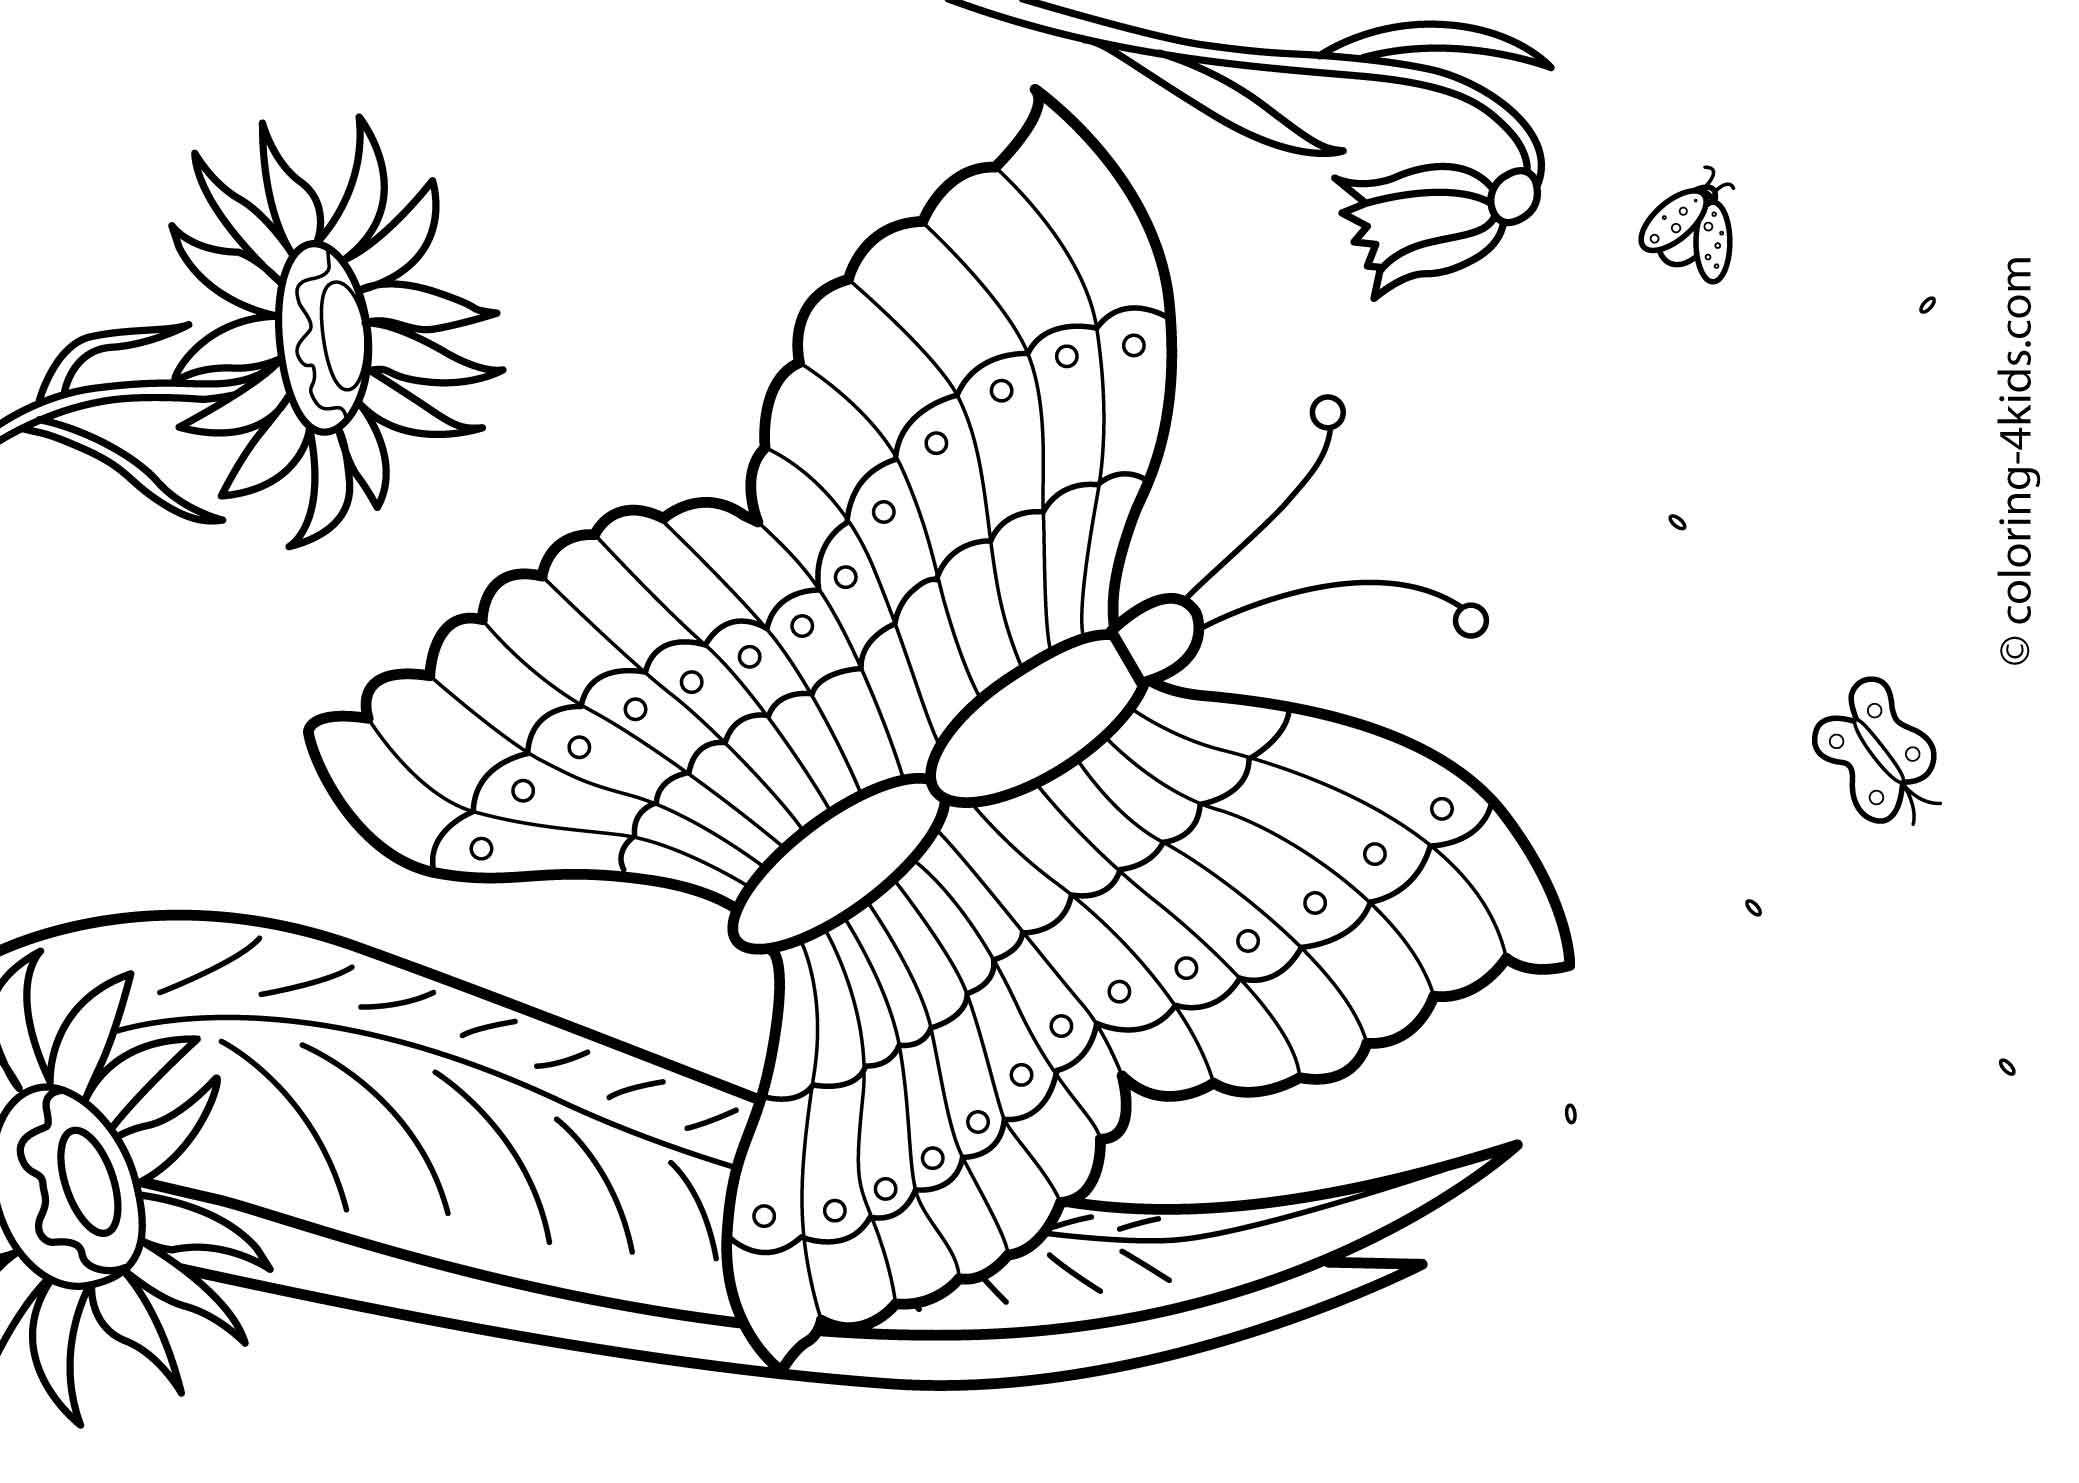 Free Printable Summer Coloring Pages
 27 Summer season coloring pages part 2